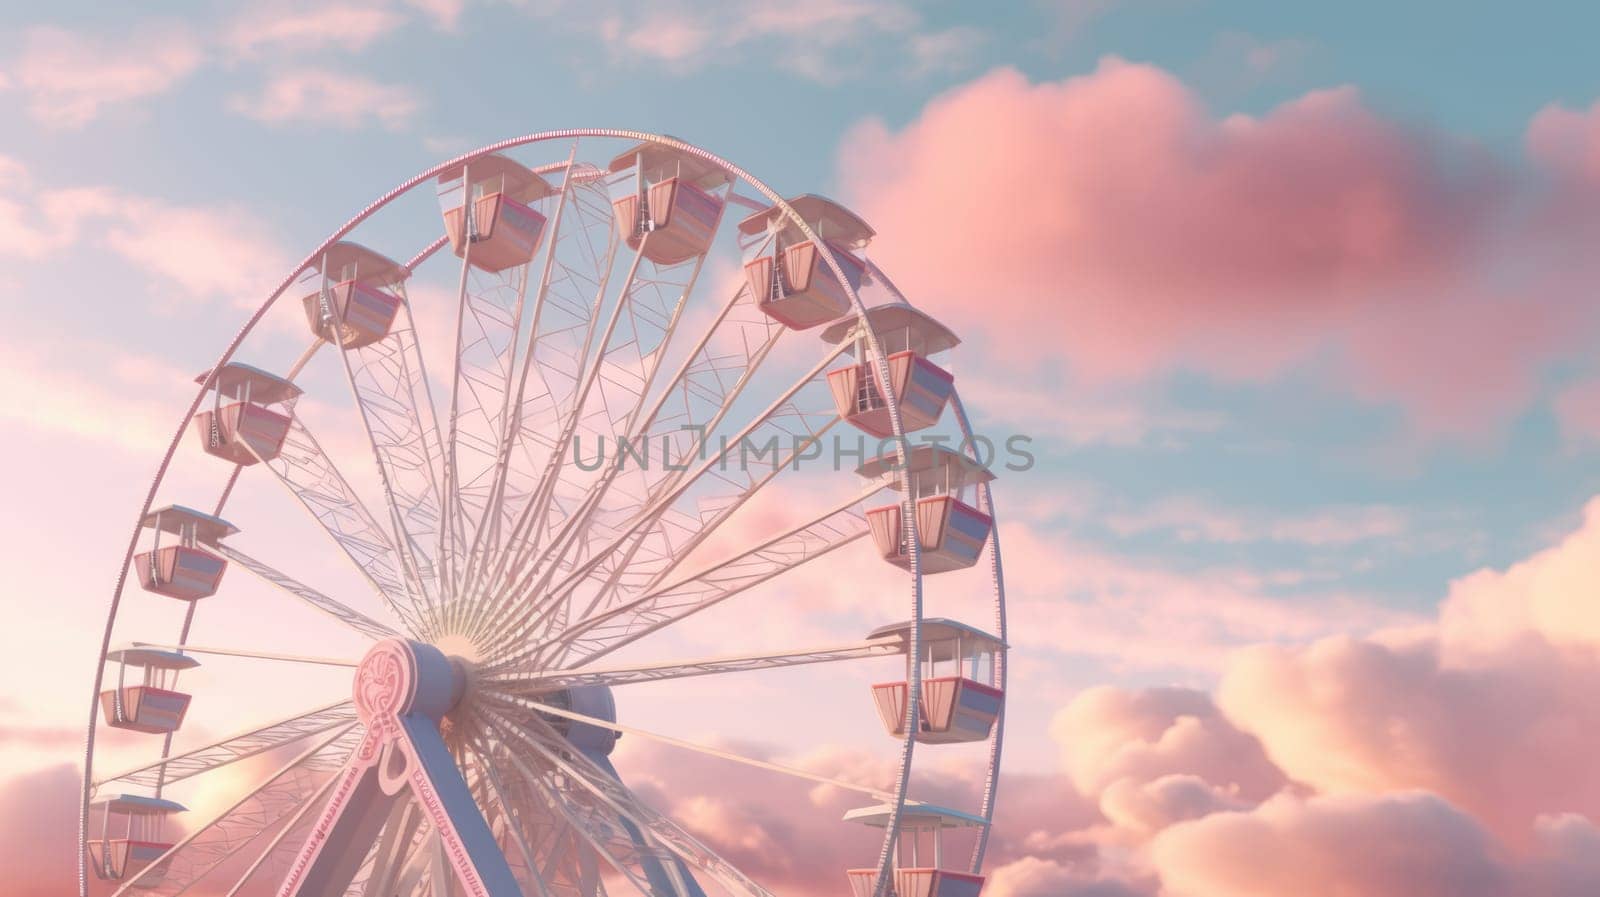 Colorful Pink Ferris Wheel at Sunset with Dramatic Cloudy Sky, Trees, Amusement Park by JuliaDorian